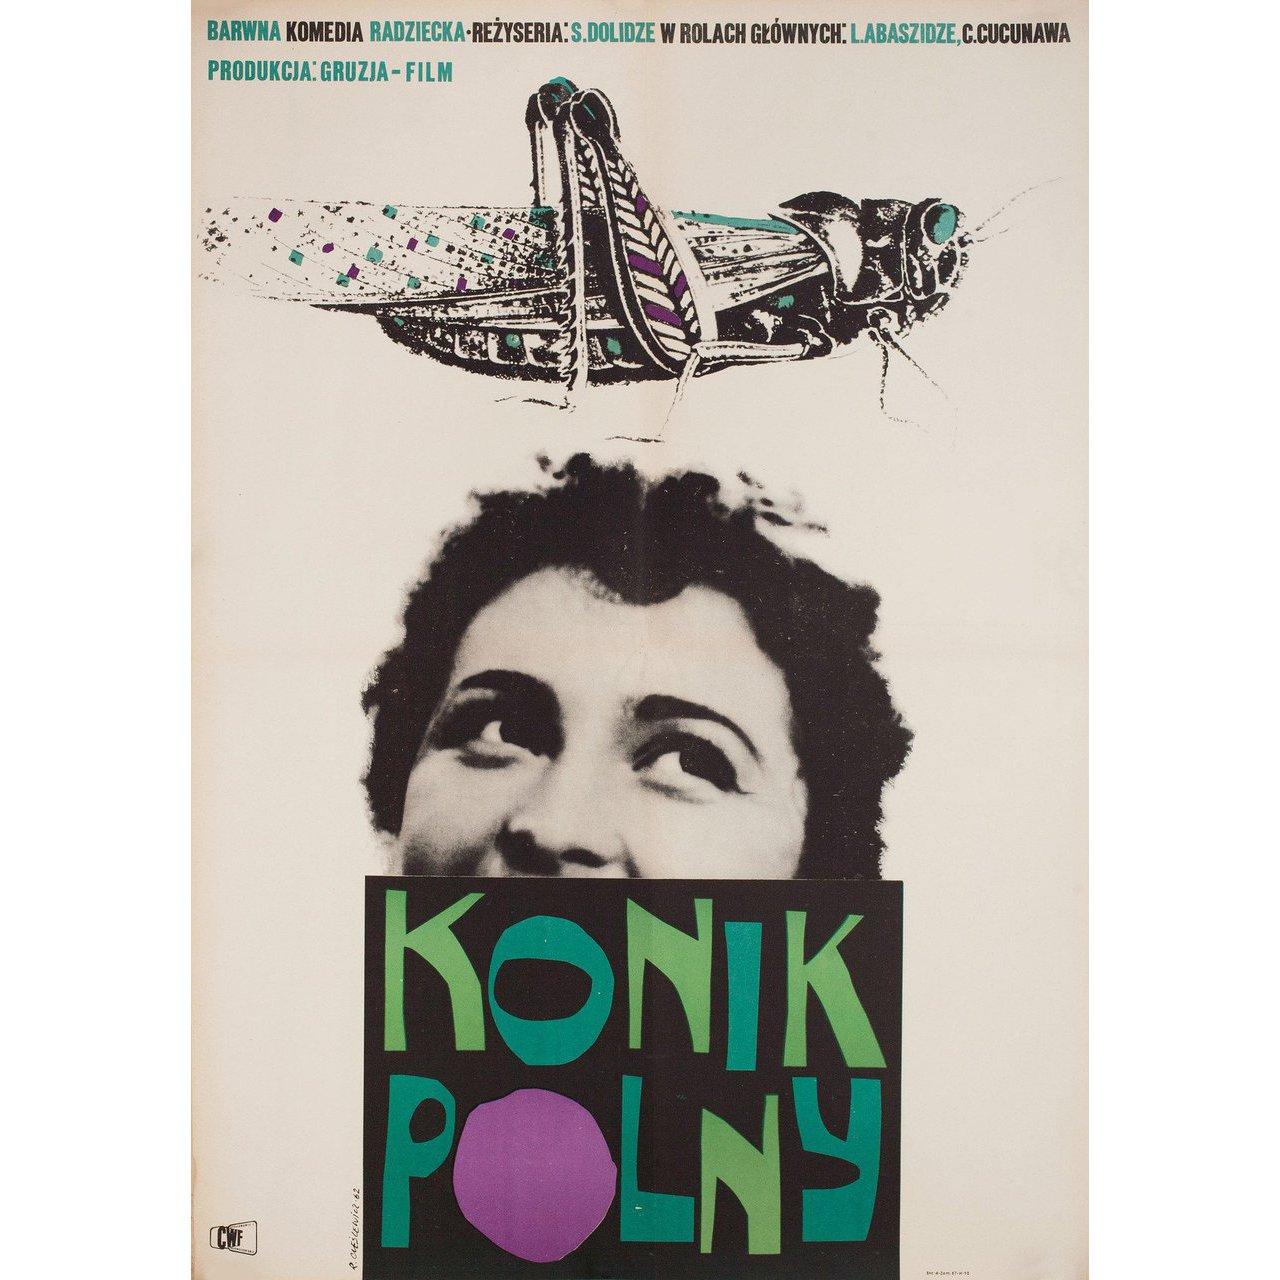 Original 1962 re-release Polish A1 poster by Roman Cieslewicz for. Very good-fine condition, folded. Many original posters were issued folded or were subsequently folded. Please note: the size is stated in inches and the actual size can vary by an